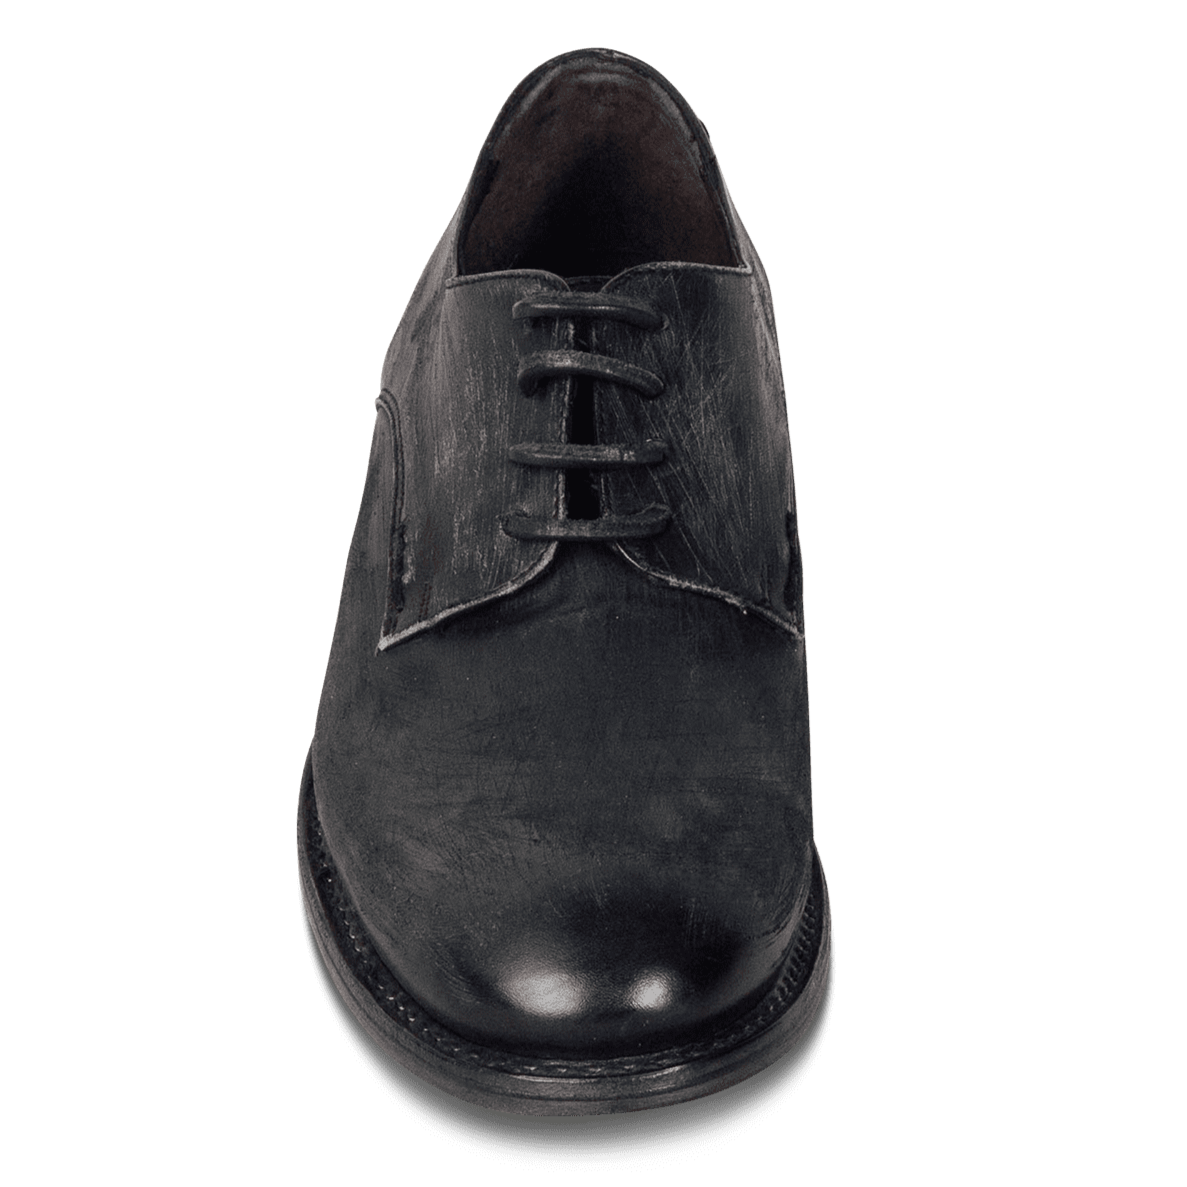 Front view showing oxford shoe construction on FREEBIRD men's Lowell stone shoe